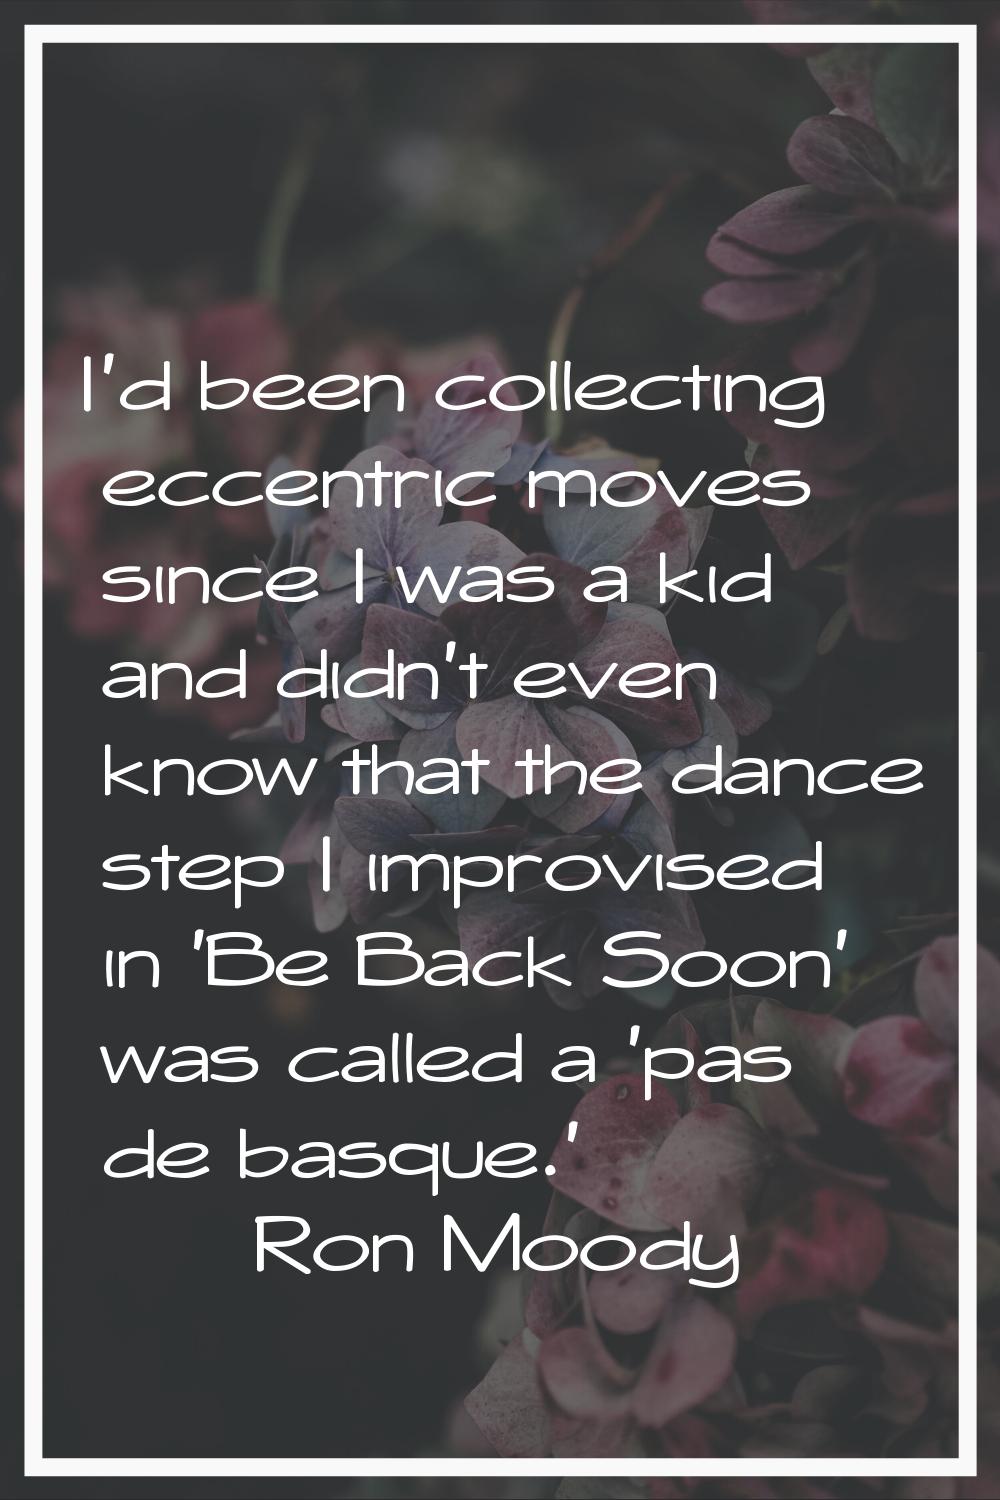 I'd been collecting eccentric moves since I was a kid and didn't even know that the dance step I im